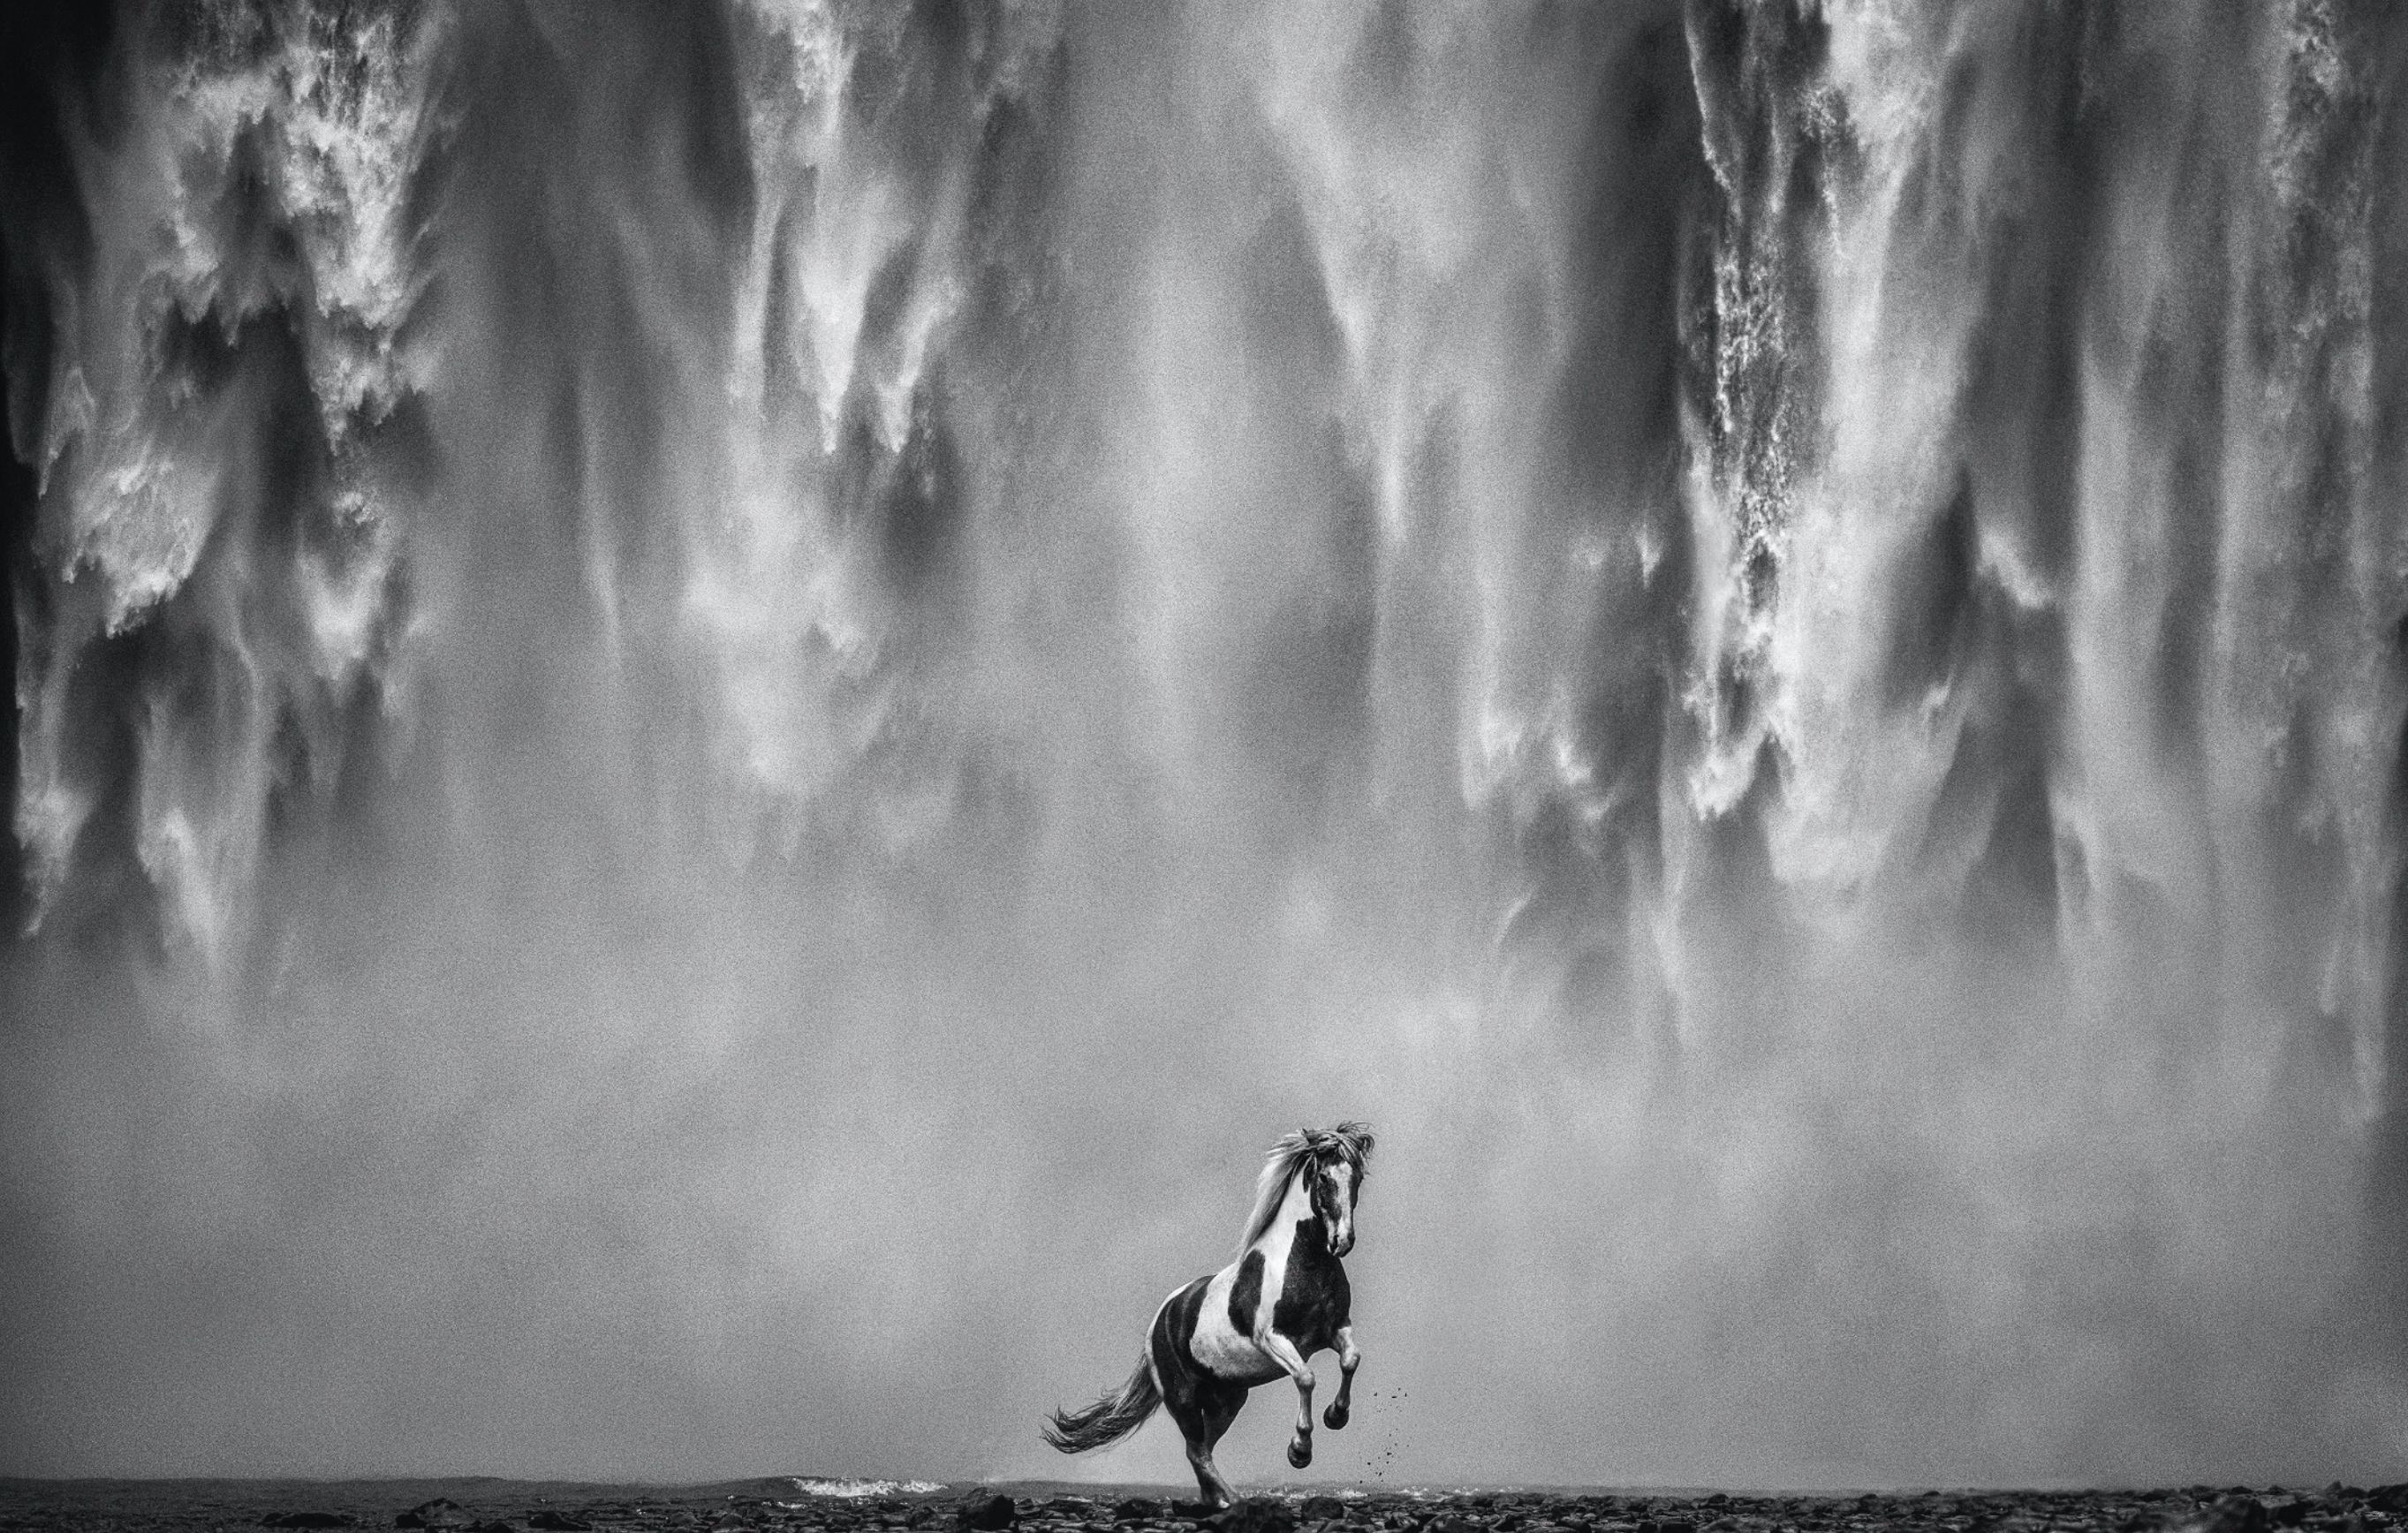 David Yarrow Black and White Photograph - Legends of the Fall